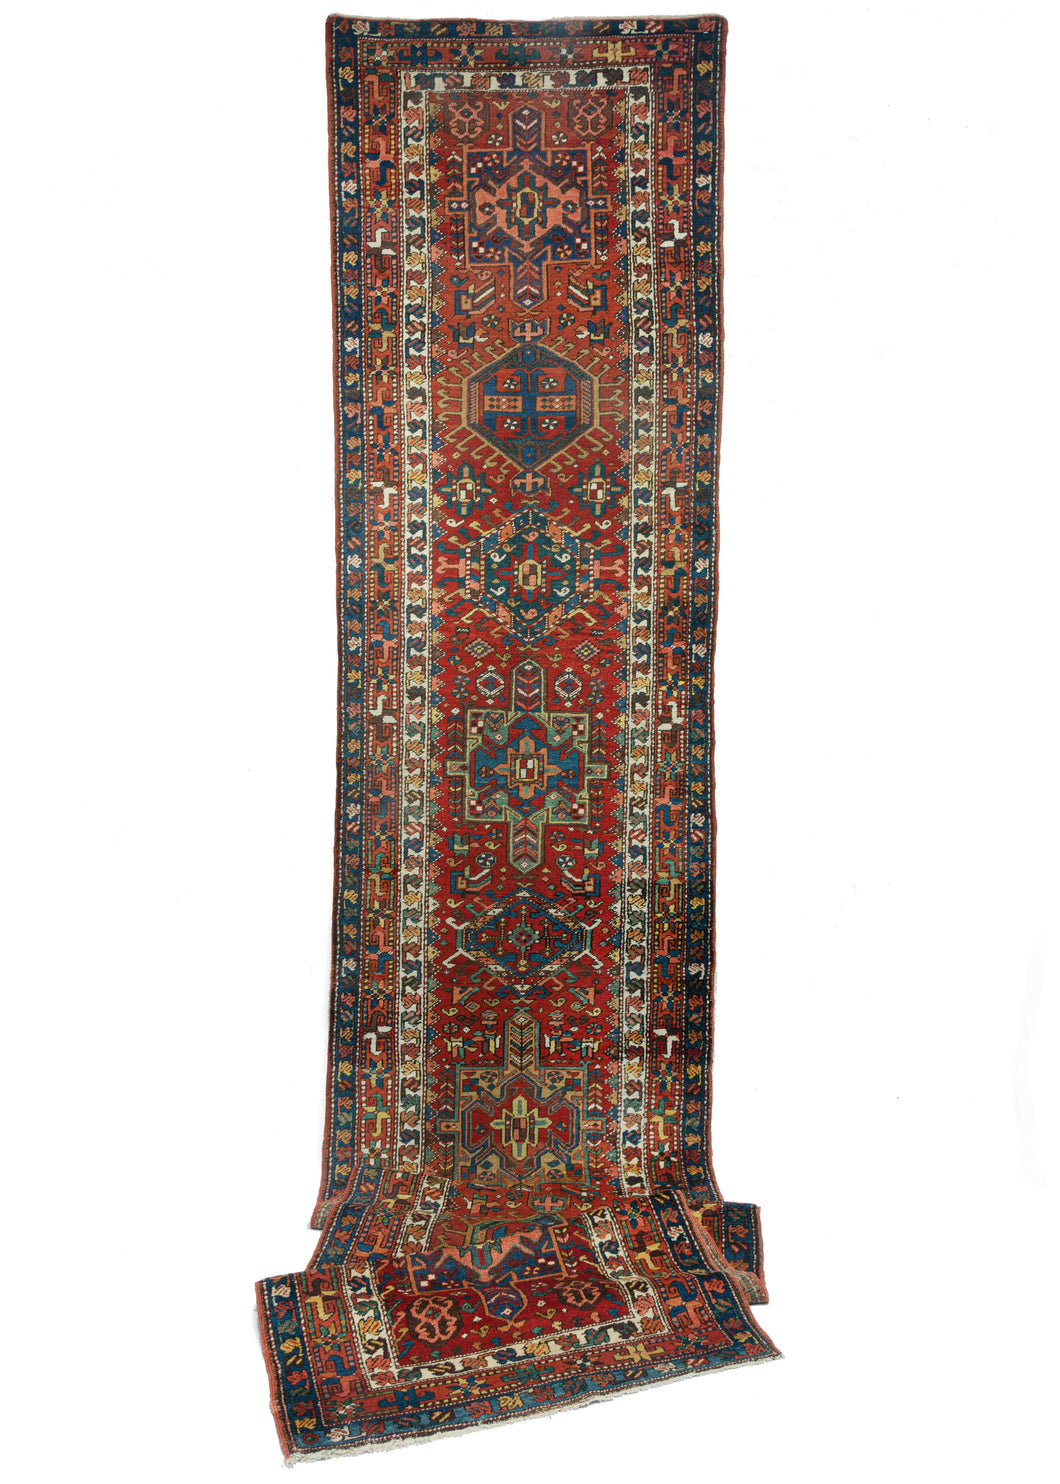 Antique NW Persian Karadja runner featuring a pattern of alternating geometric shapes and hooked lozenges on a beautiful brick-colored field. A cheerful range of Indigo blues, sage green, corals, yellow and purple interact beautifully while an ivory tone both frames the field and provides bright pops of cool white.